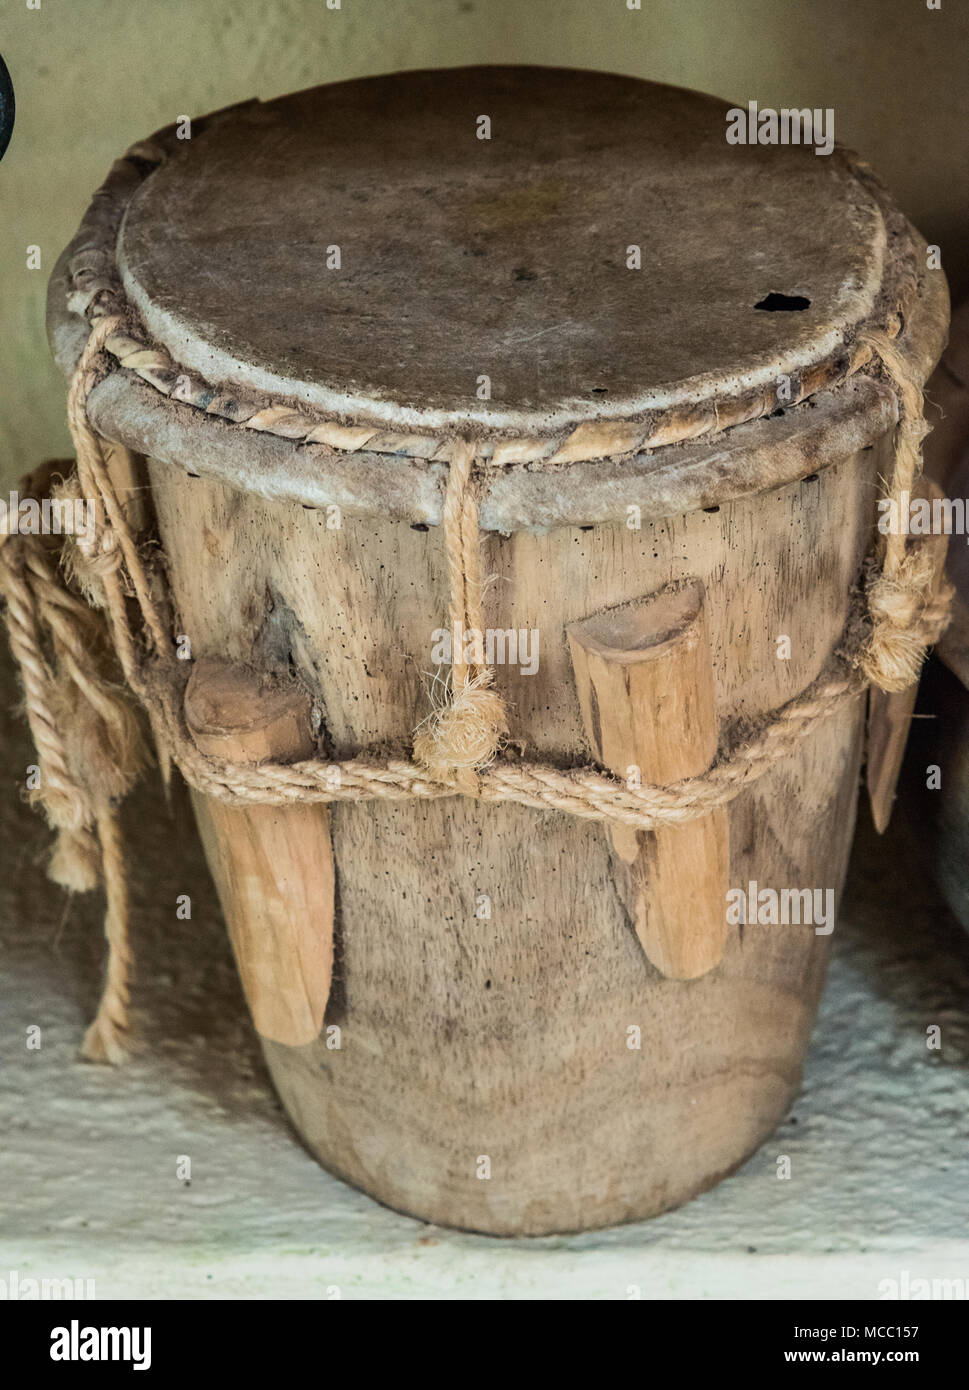 A traditional wooden drum used by indigenous tribe. Colombia, South America  Stock Photo - Alamy